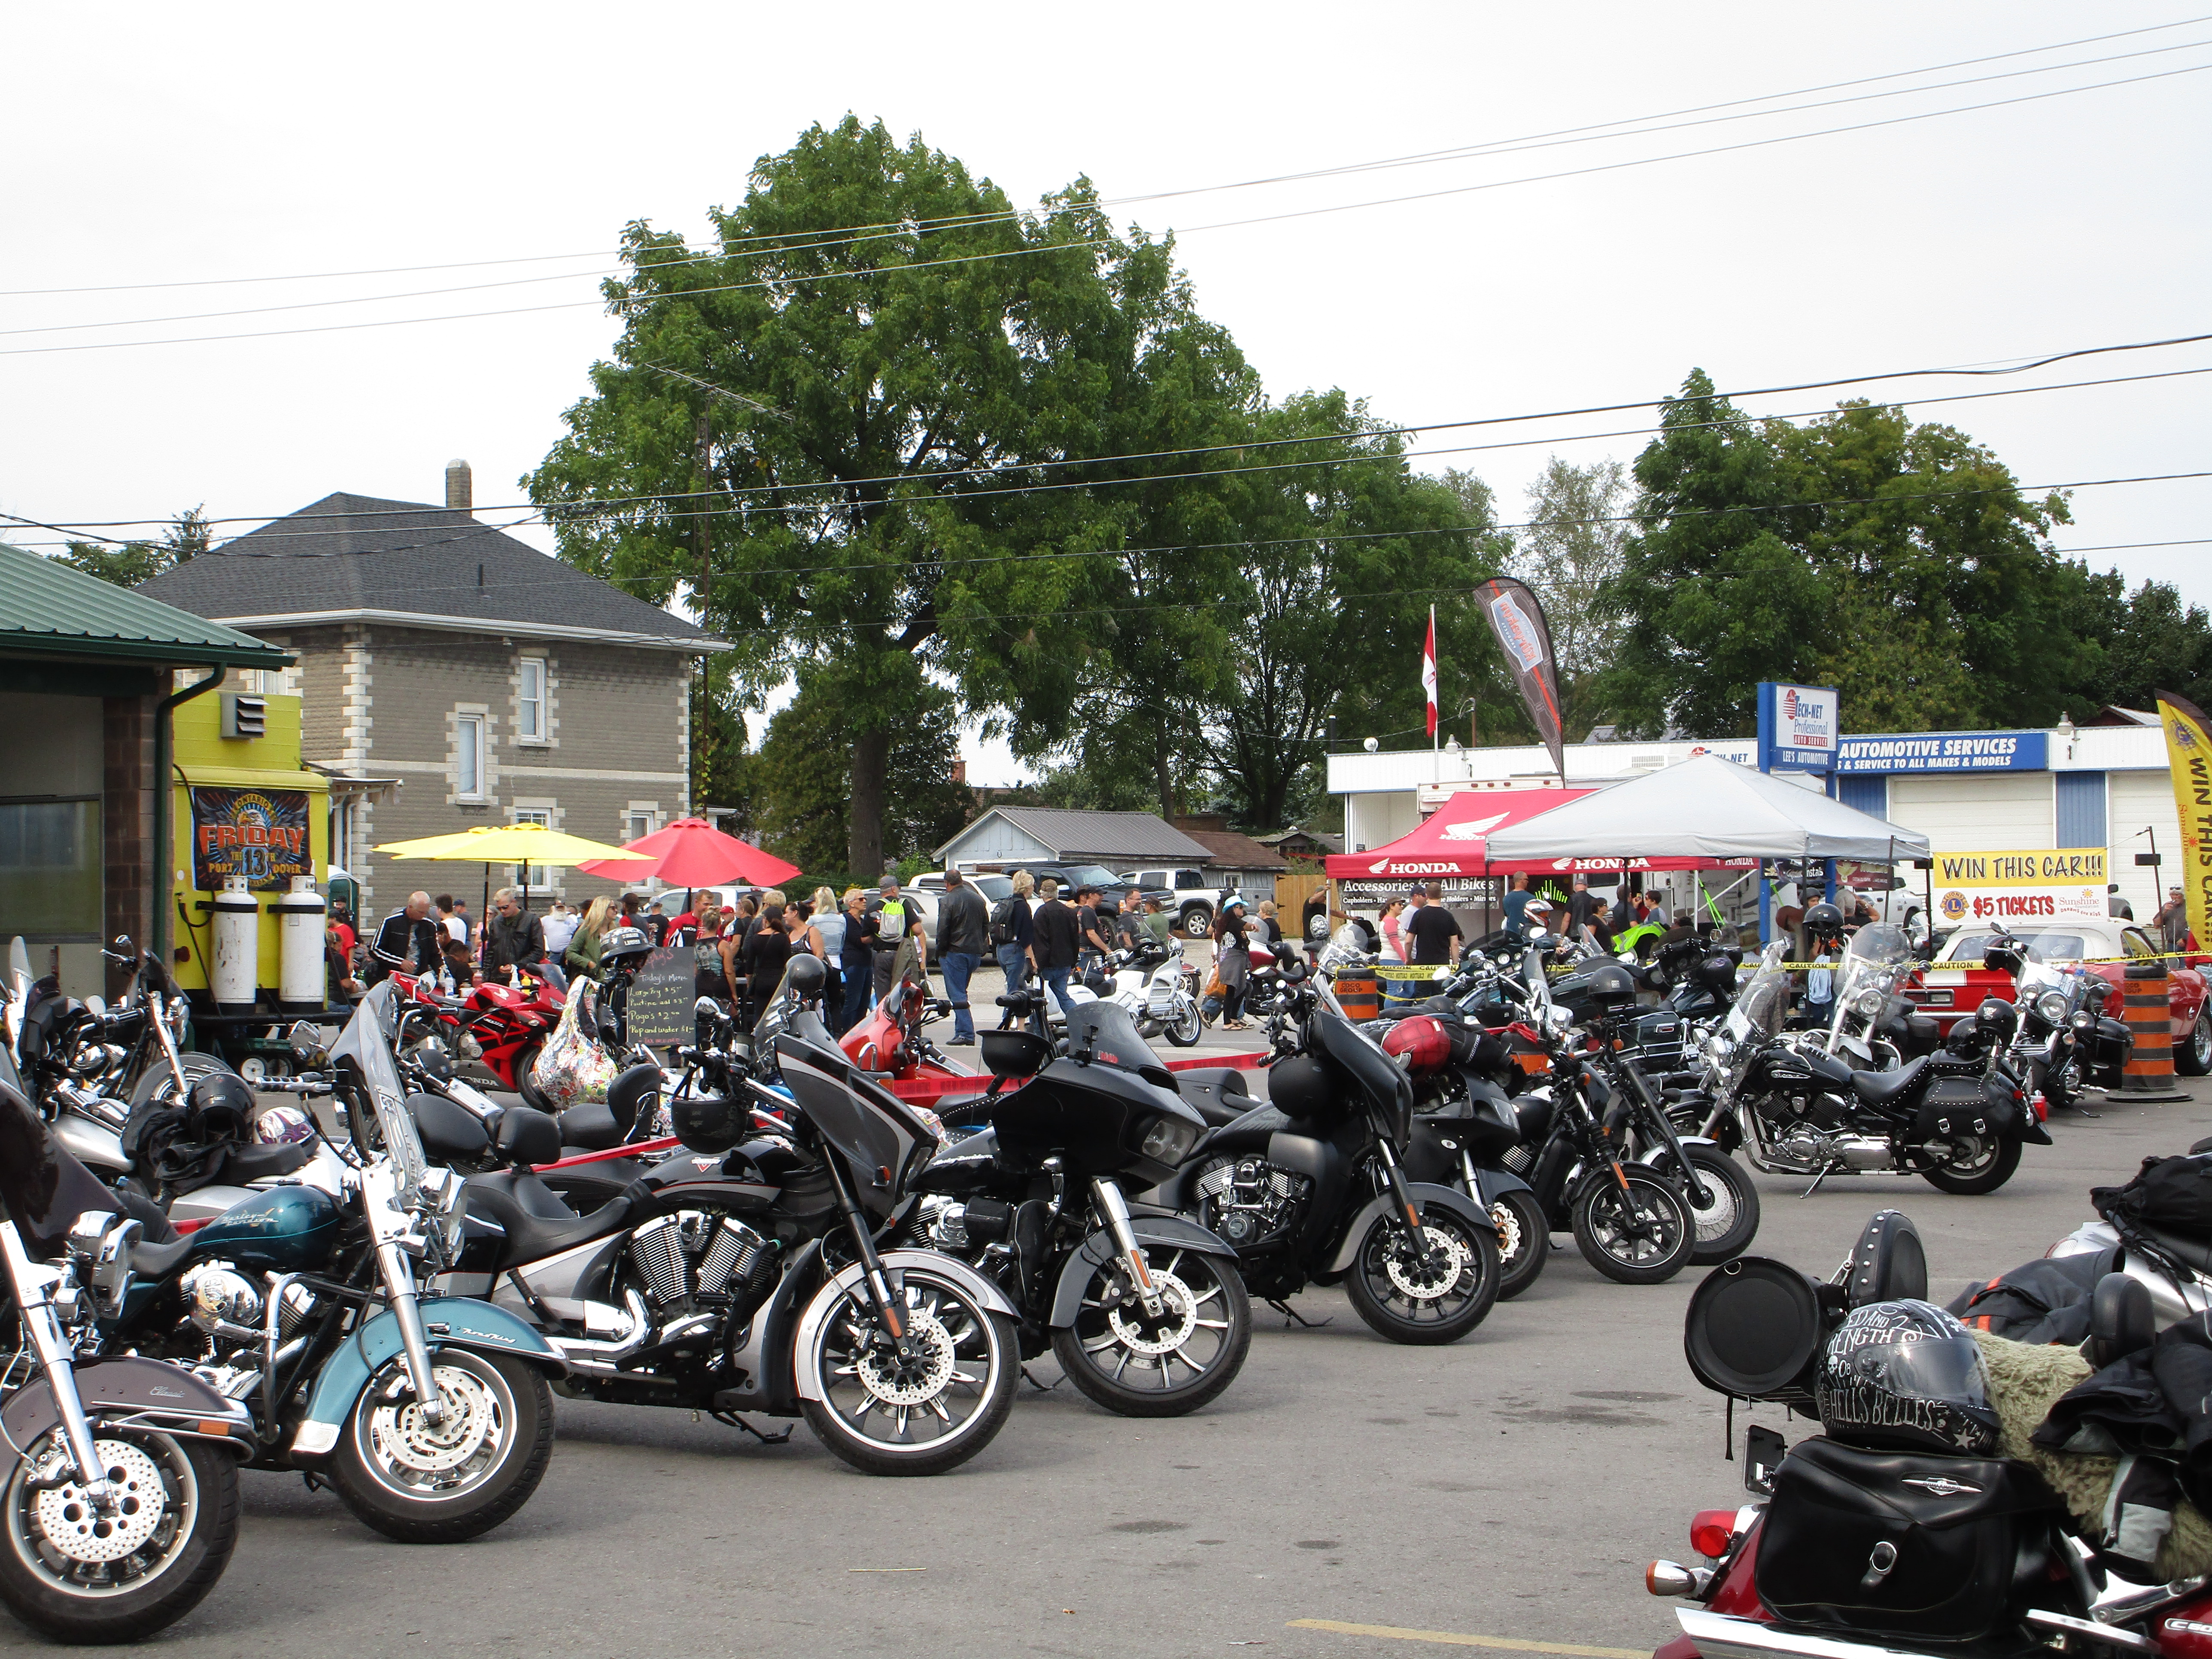 Tens of thousands potentially descending on Port Dover for Friday the 13th: OPP